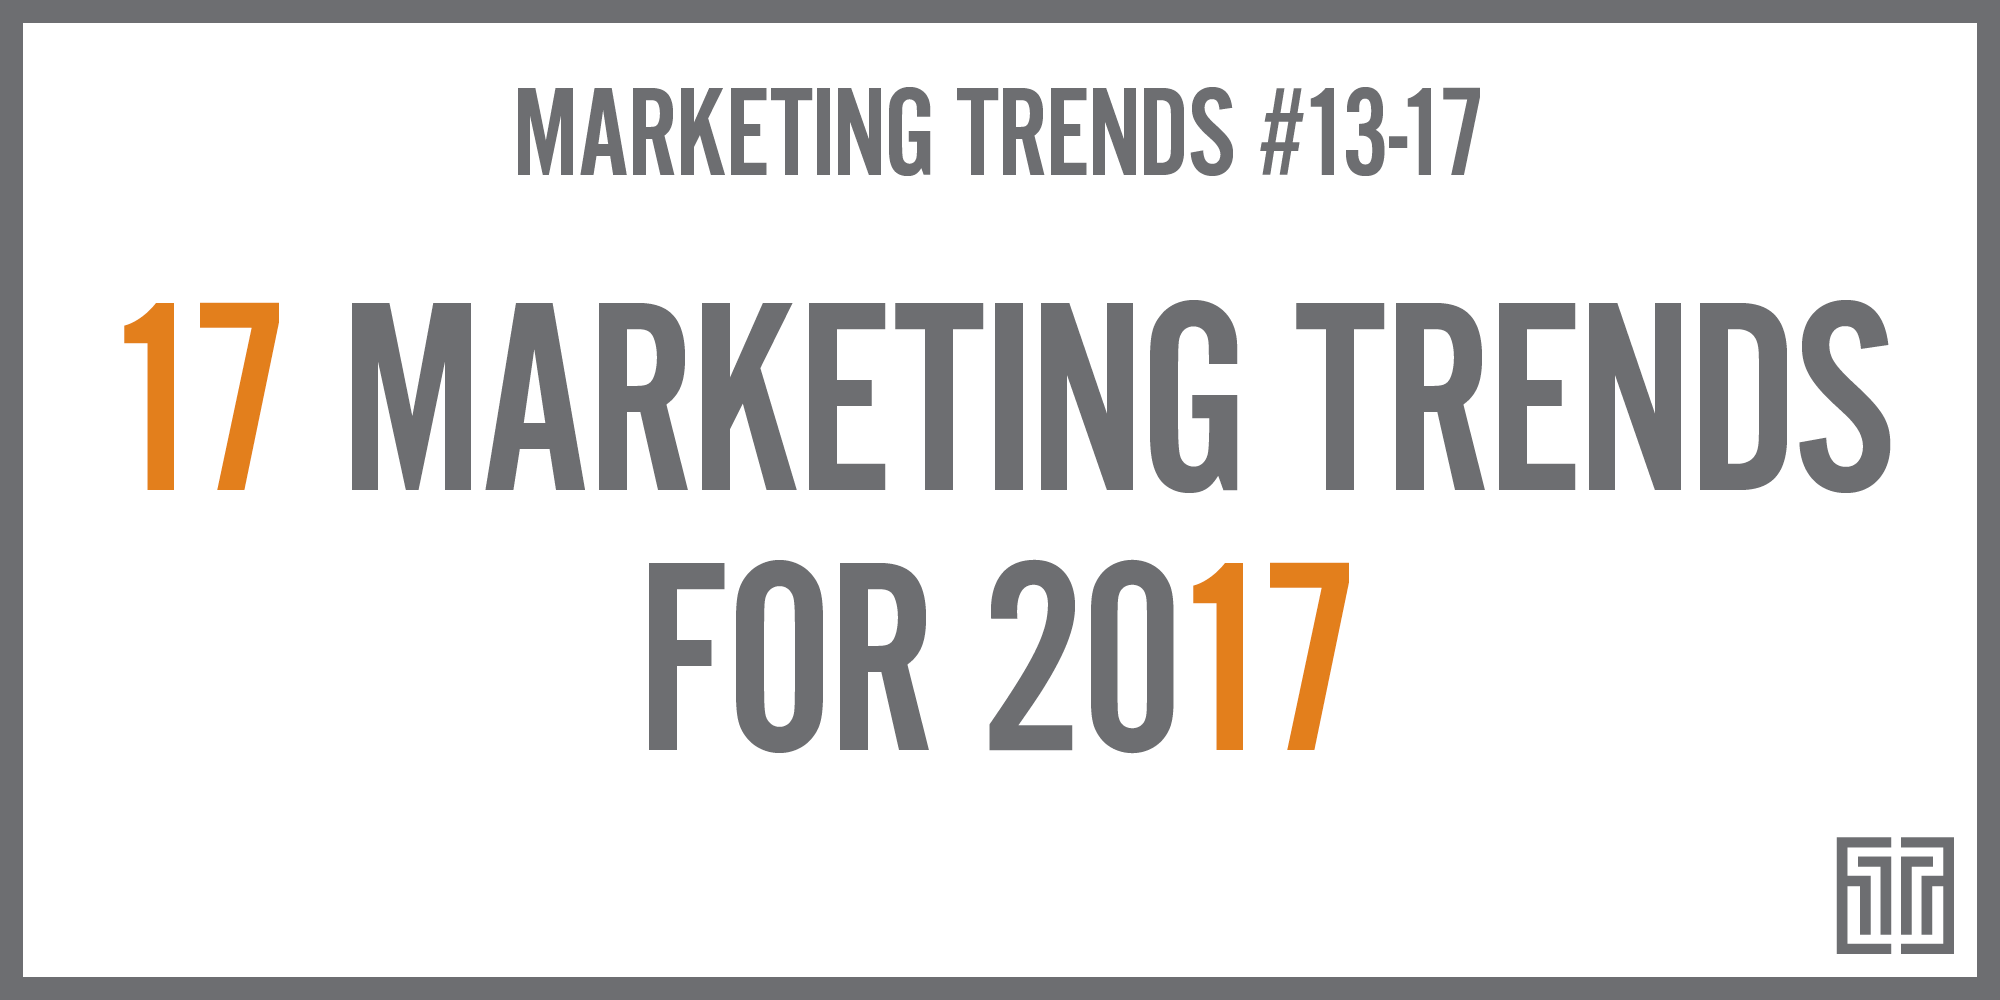 The Top 17 Marketing Trends for 2017: Trends 13-17